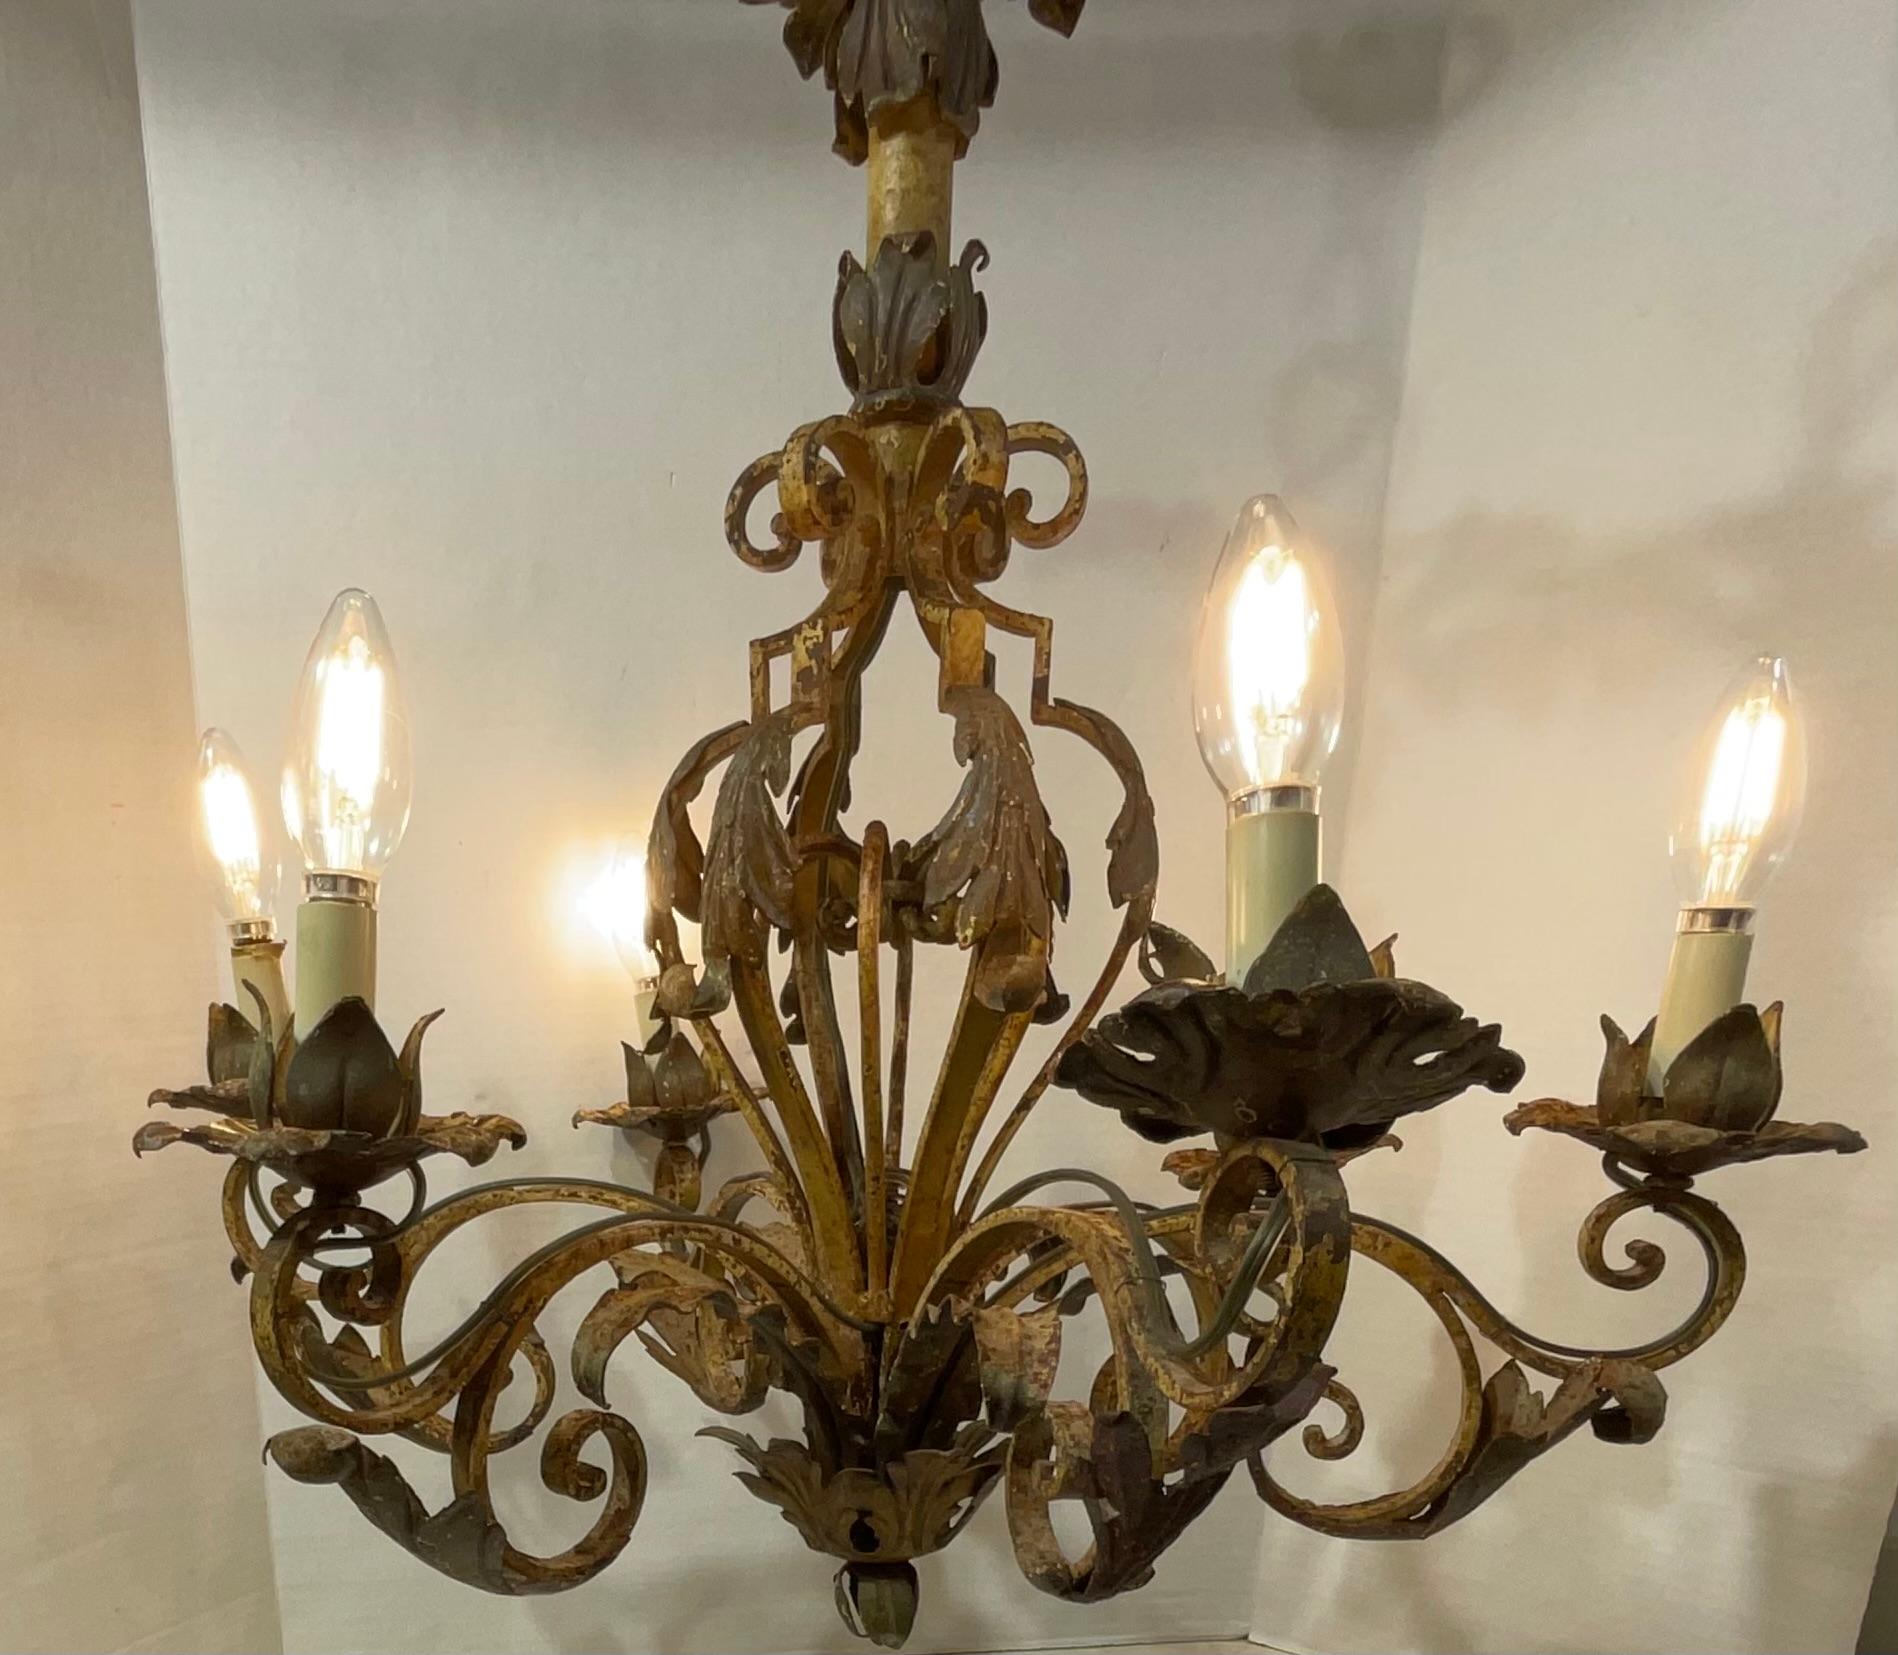 Hand-Crafted Ornate Wrought Iron Mizner Style Chandelier For Sale